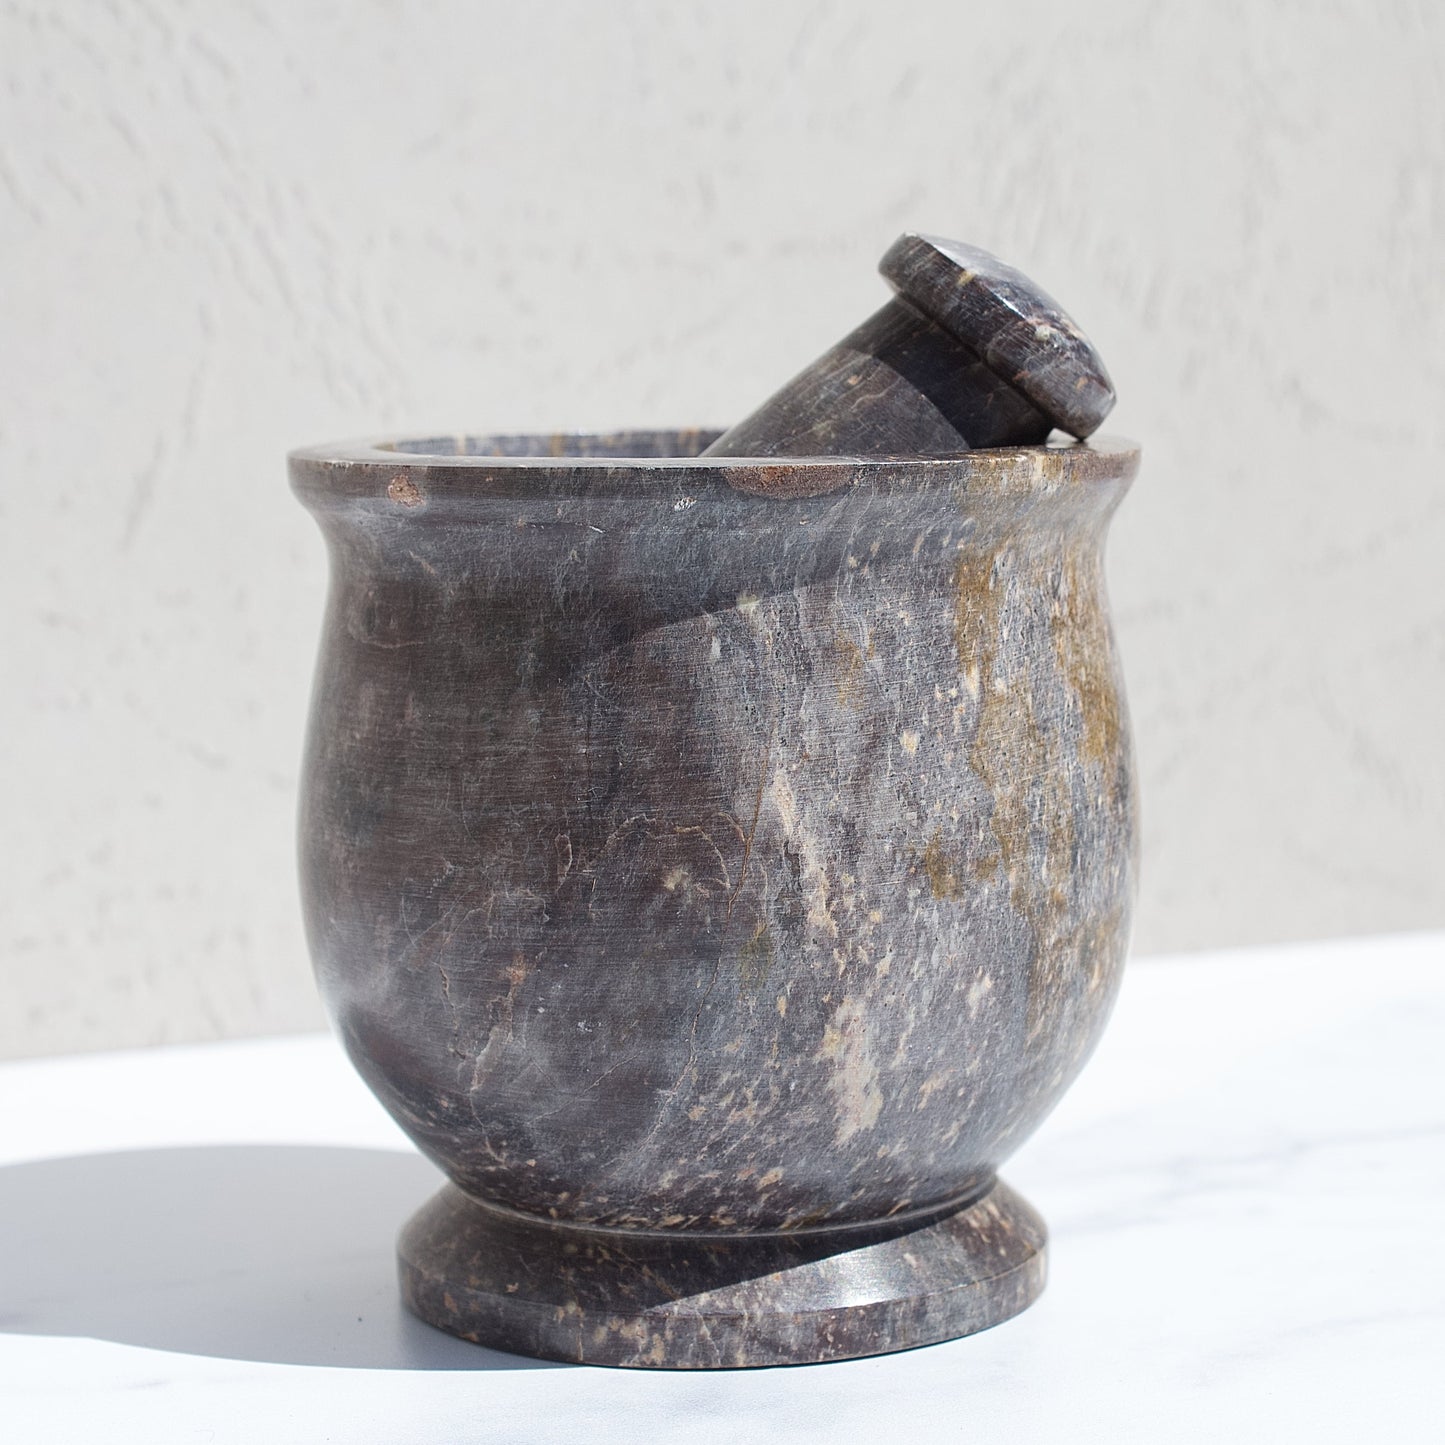 soapstone mortar and pestle